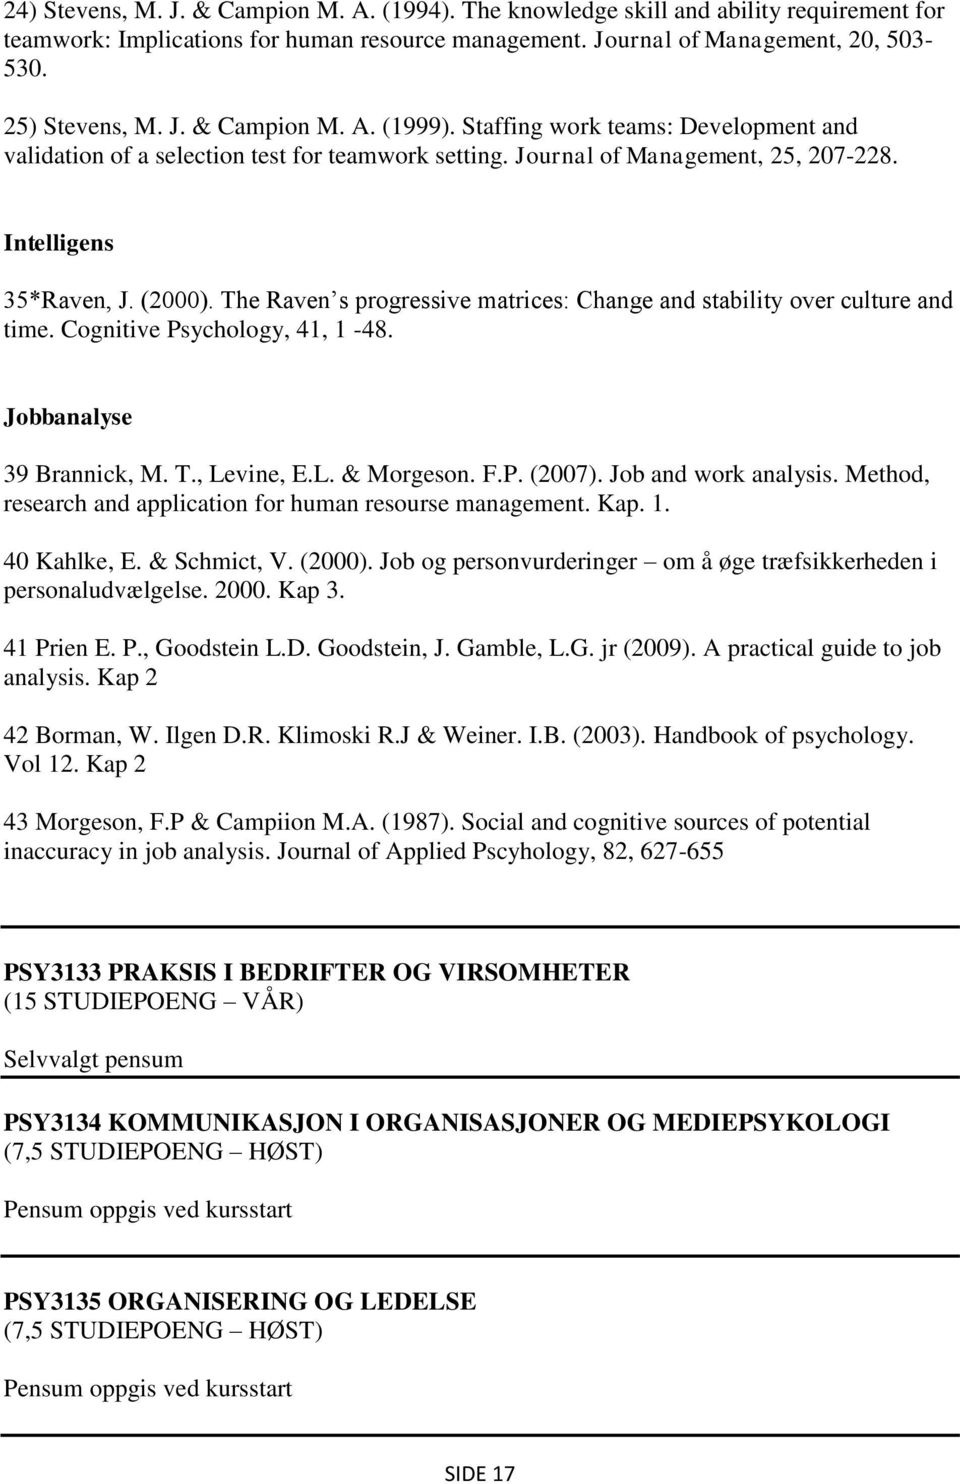 The Raven s progressive matrices: Change and stability over culture and time. Cognitive Psychology, 41, 1-48. Jobbanalyse 39 Brannick, M. T., Levine, E.L. & Morgeson. F.P. (2007).